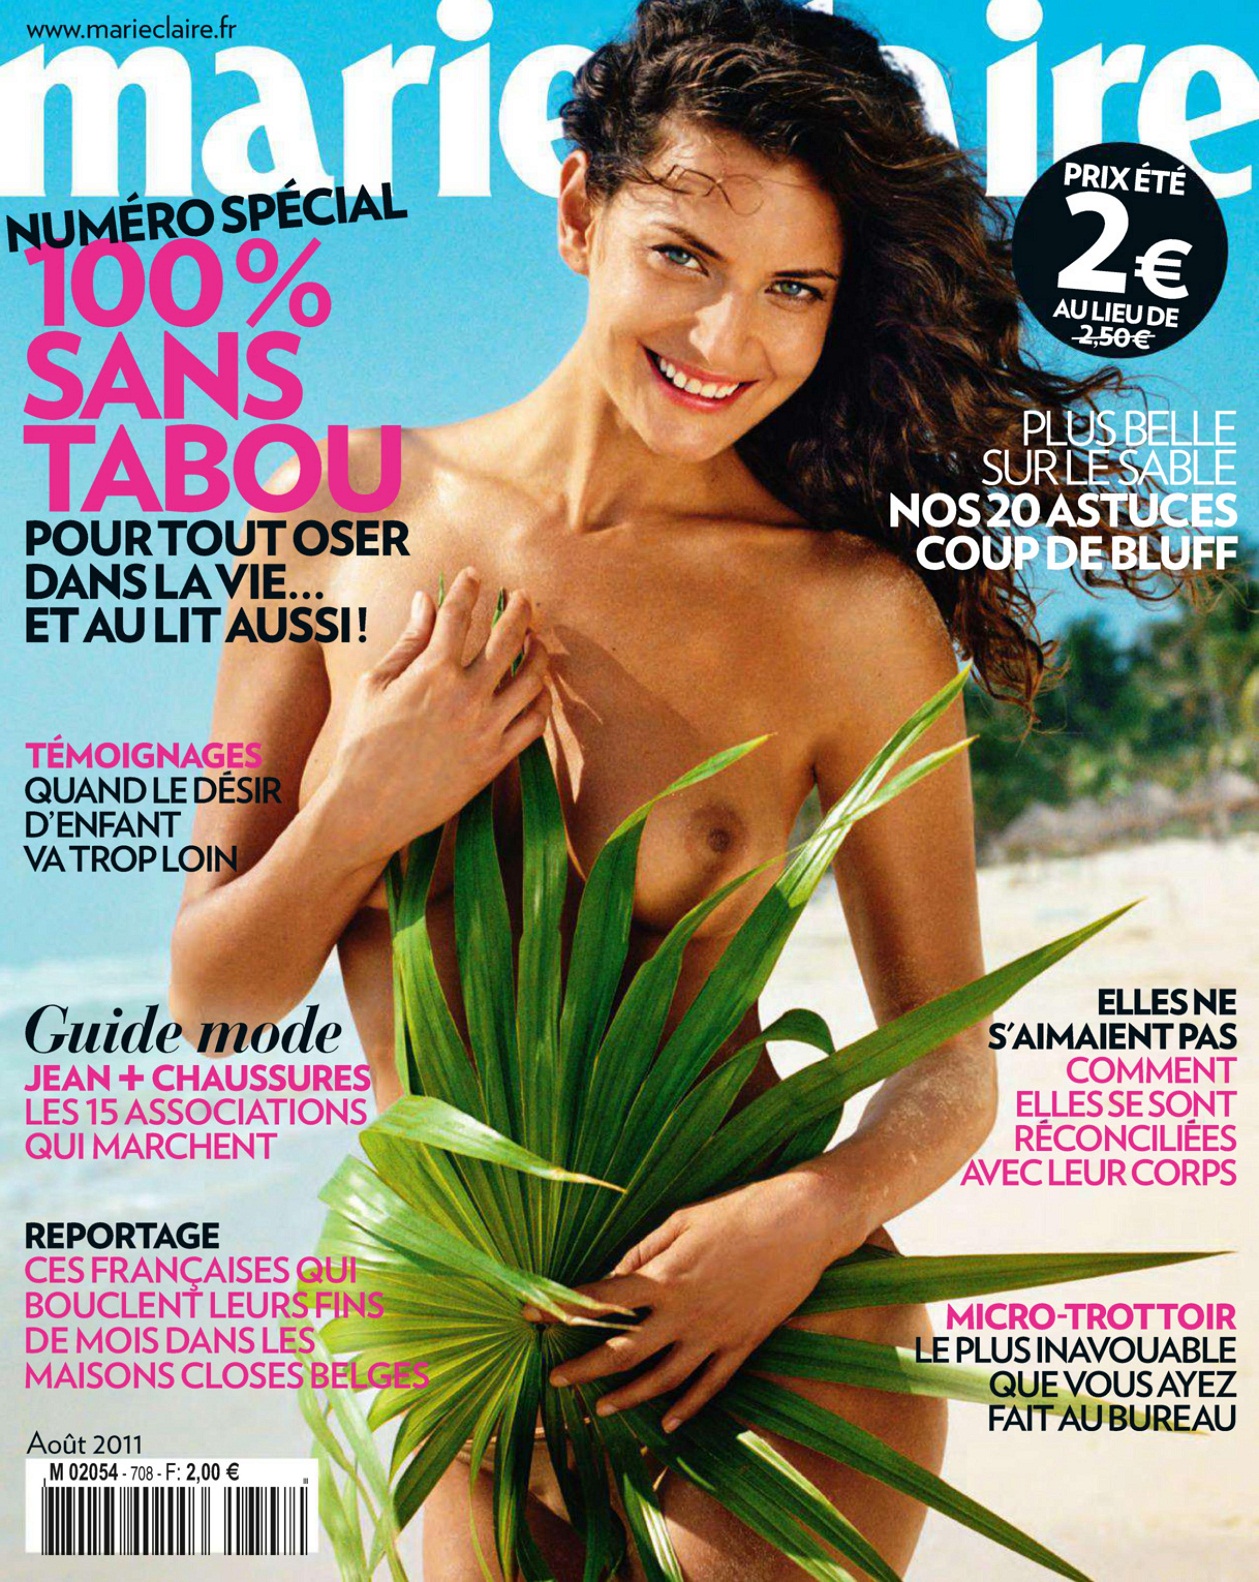 Reka Ebergenyi nude in Marie Claire France